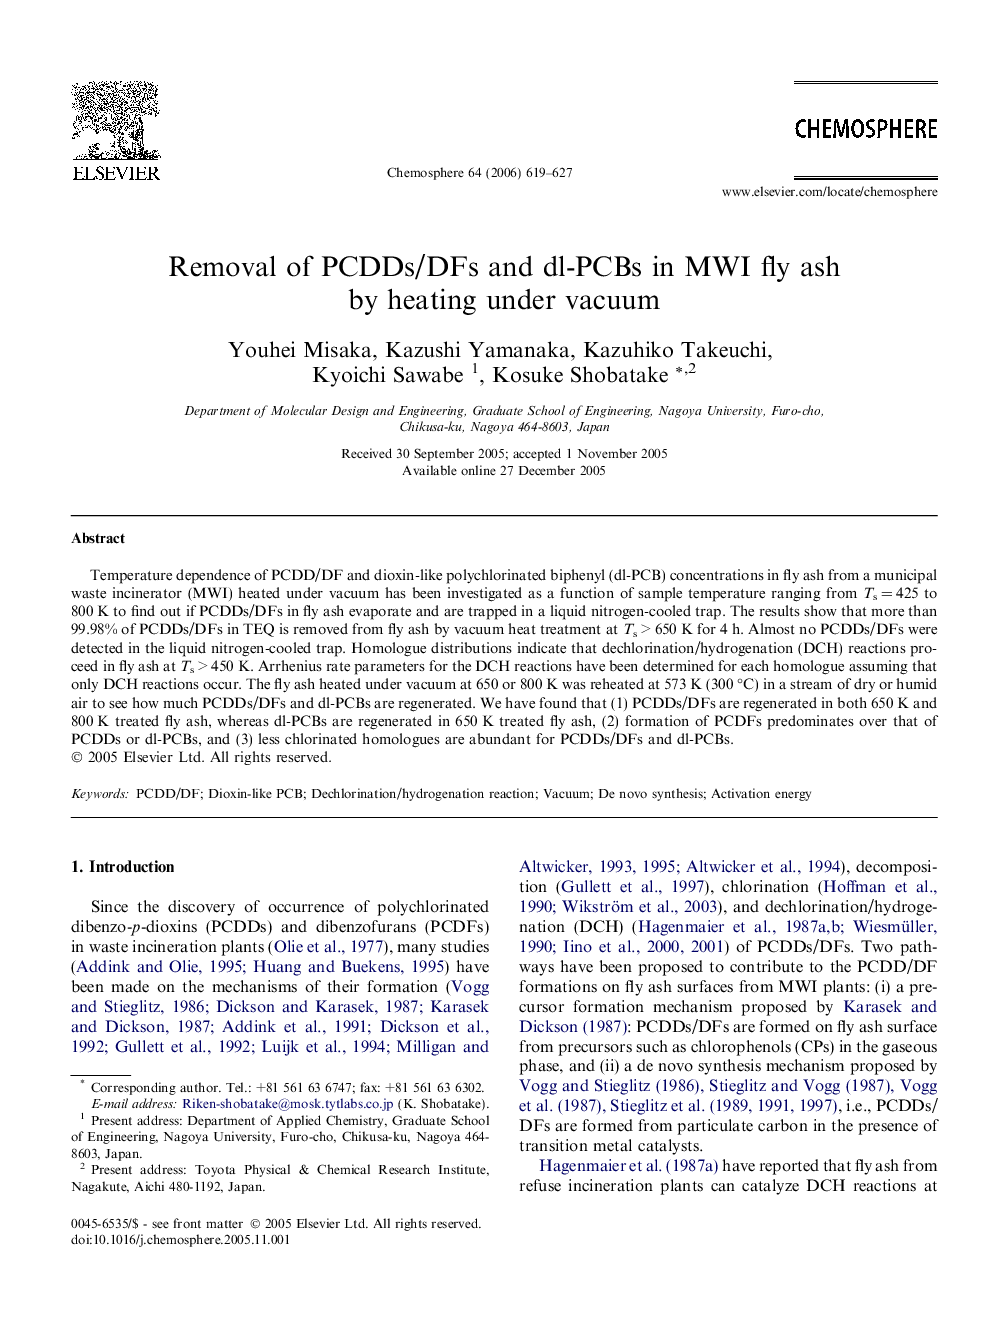 Removal of PCDDs/DFs and dl-PCBs in MWI fly ash by heating under vacuum